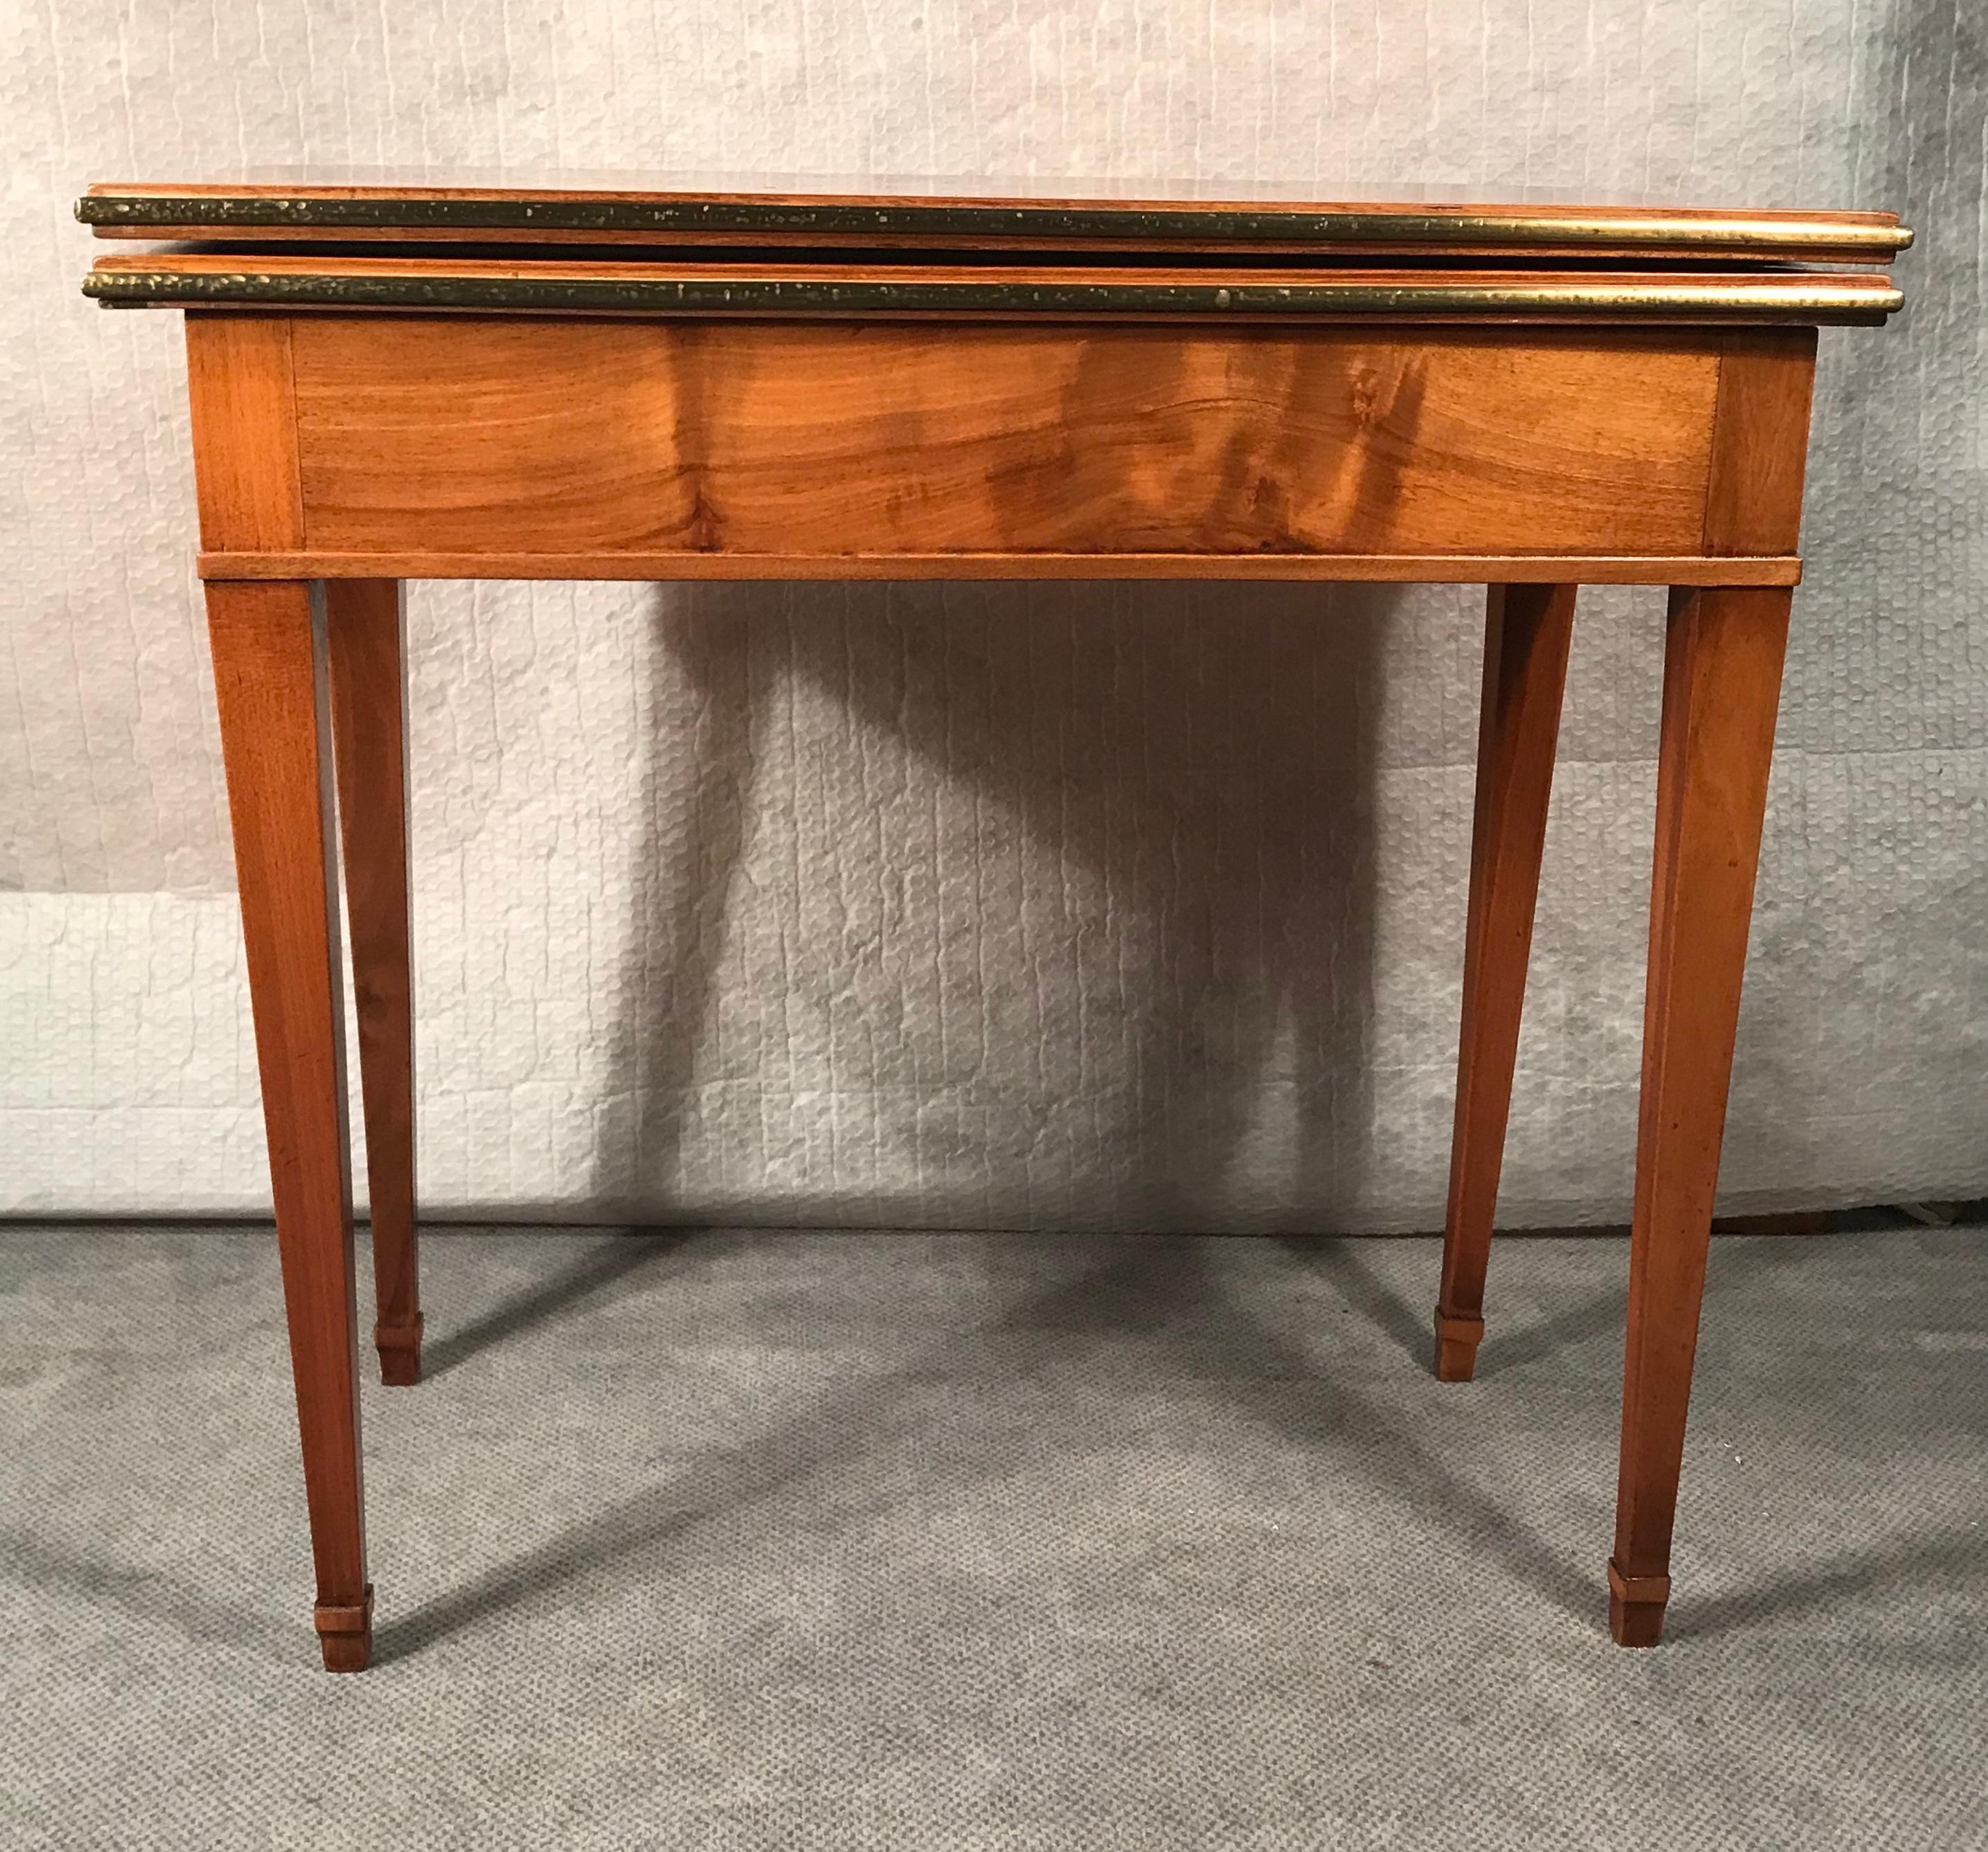 Biedermeier card or console table, South German 1820. The table has beautiful walnut veneer on top, sides and legs. The top can be folded out and turned and then rests on the base of the table. The folded out top is covered with yellow velvet. 
The